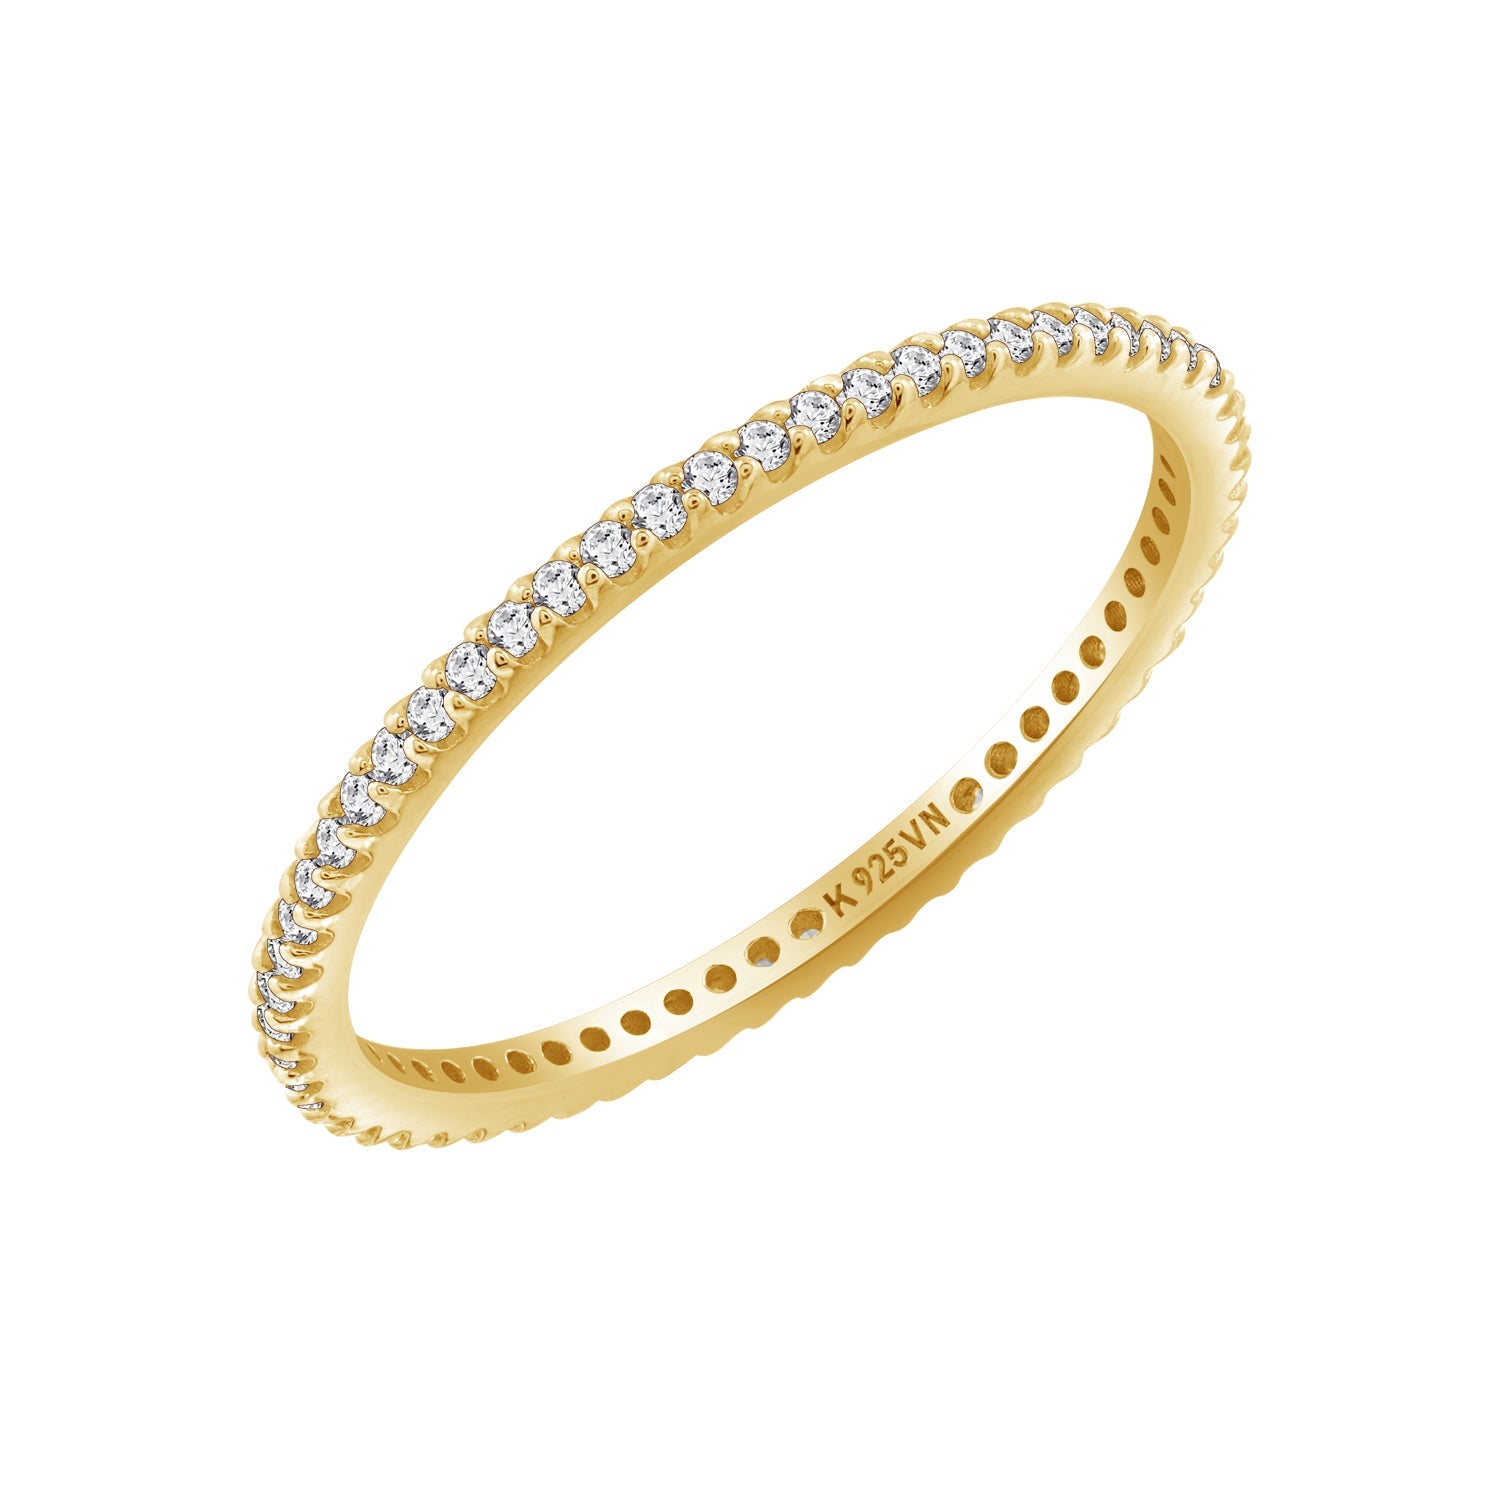 Waning Moon Ring 6 1/2 / White 14K Solid Gold